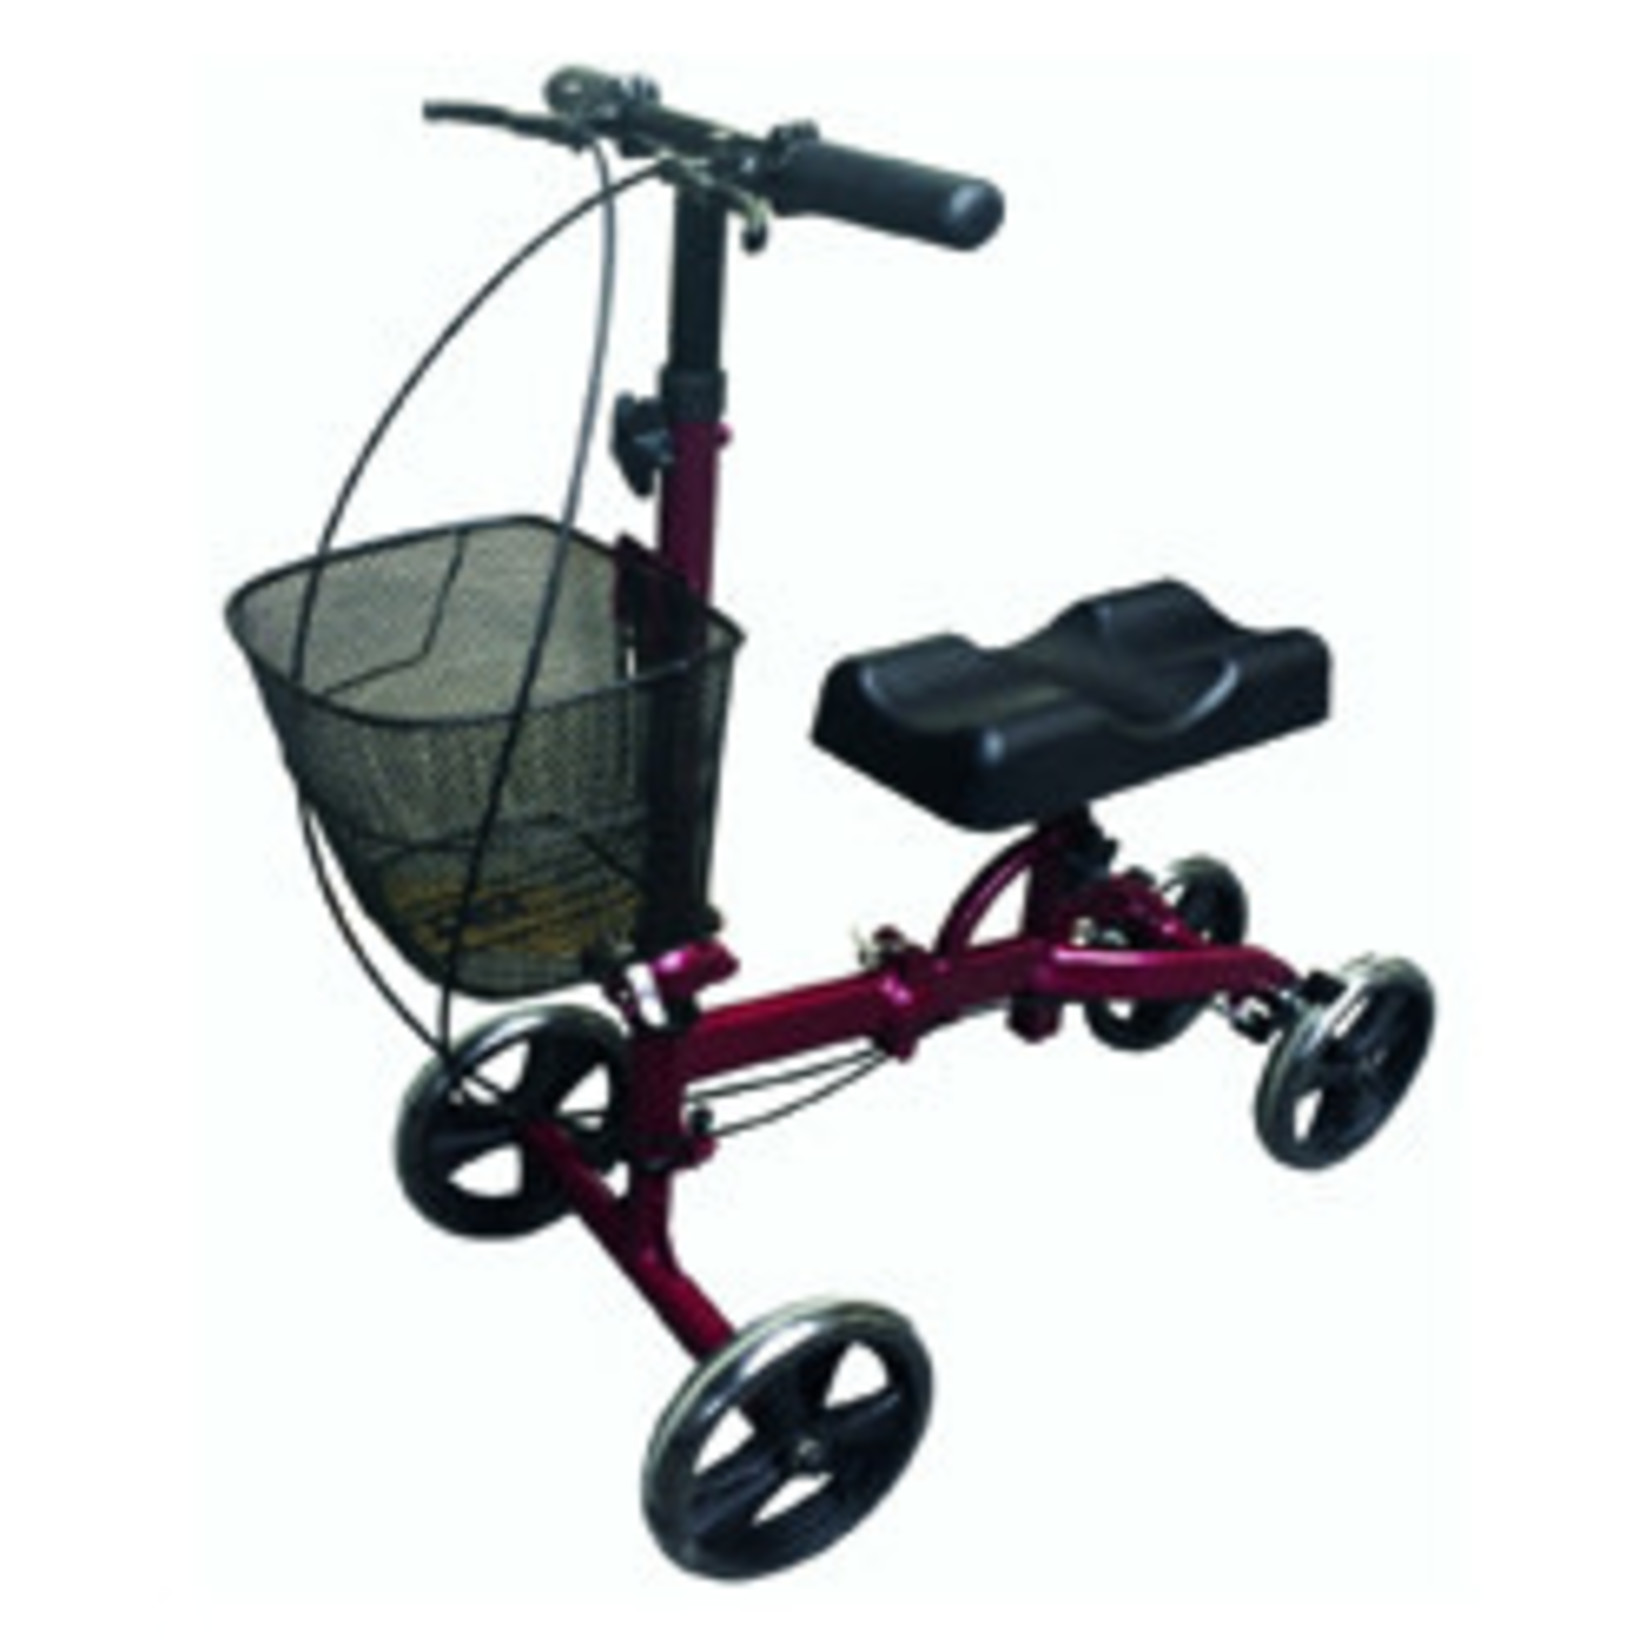 Dalton Knee Scooter with Seat and Basket